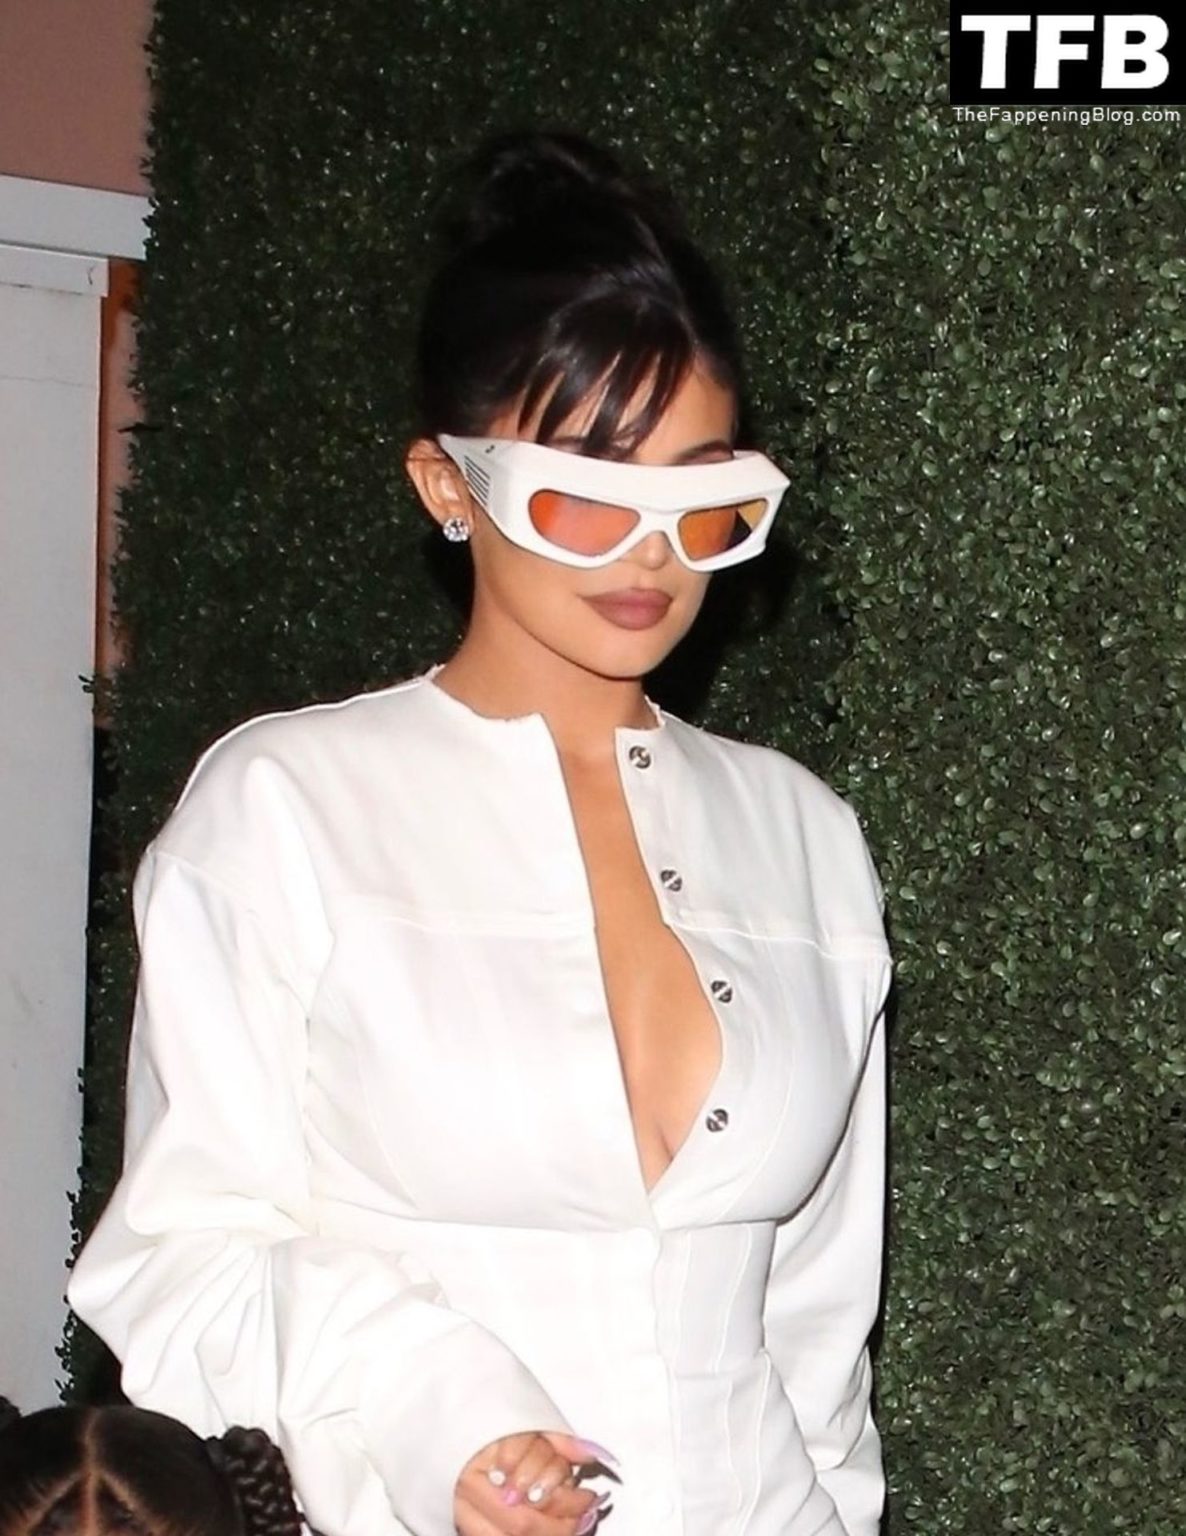 Kylie Jenner Showcases Her Svelte Figure In All White 72 Photos Thefappening 